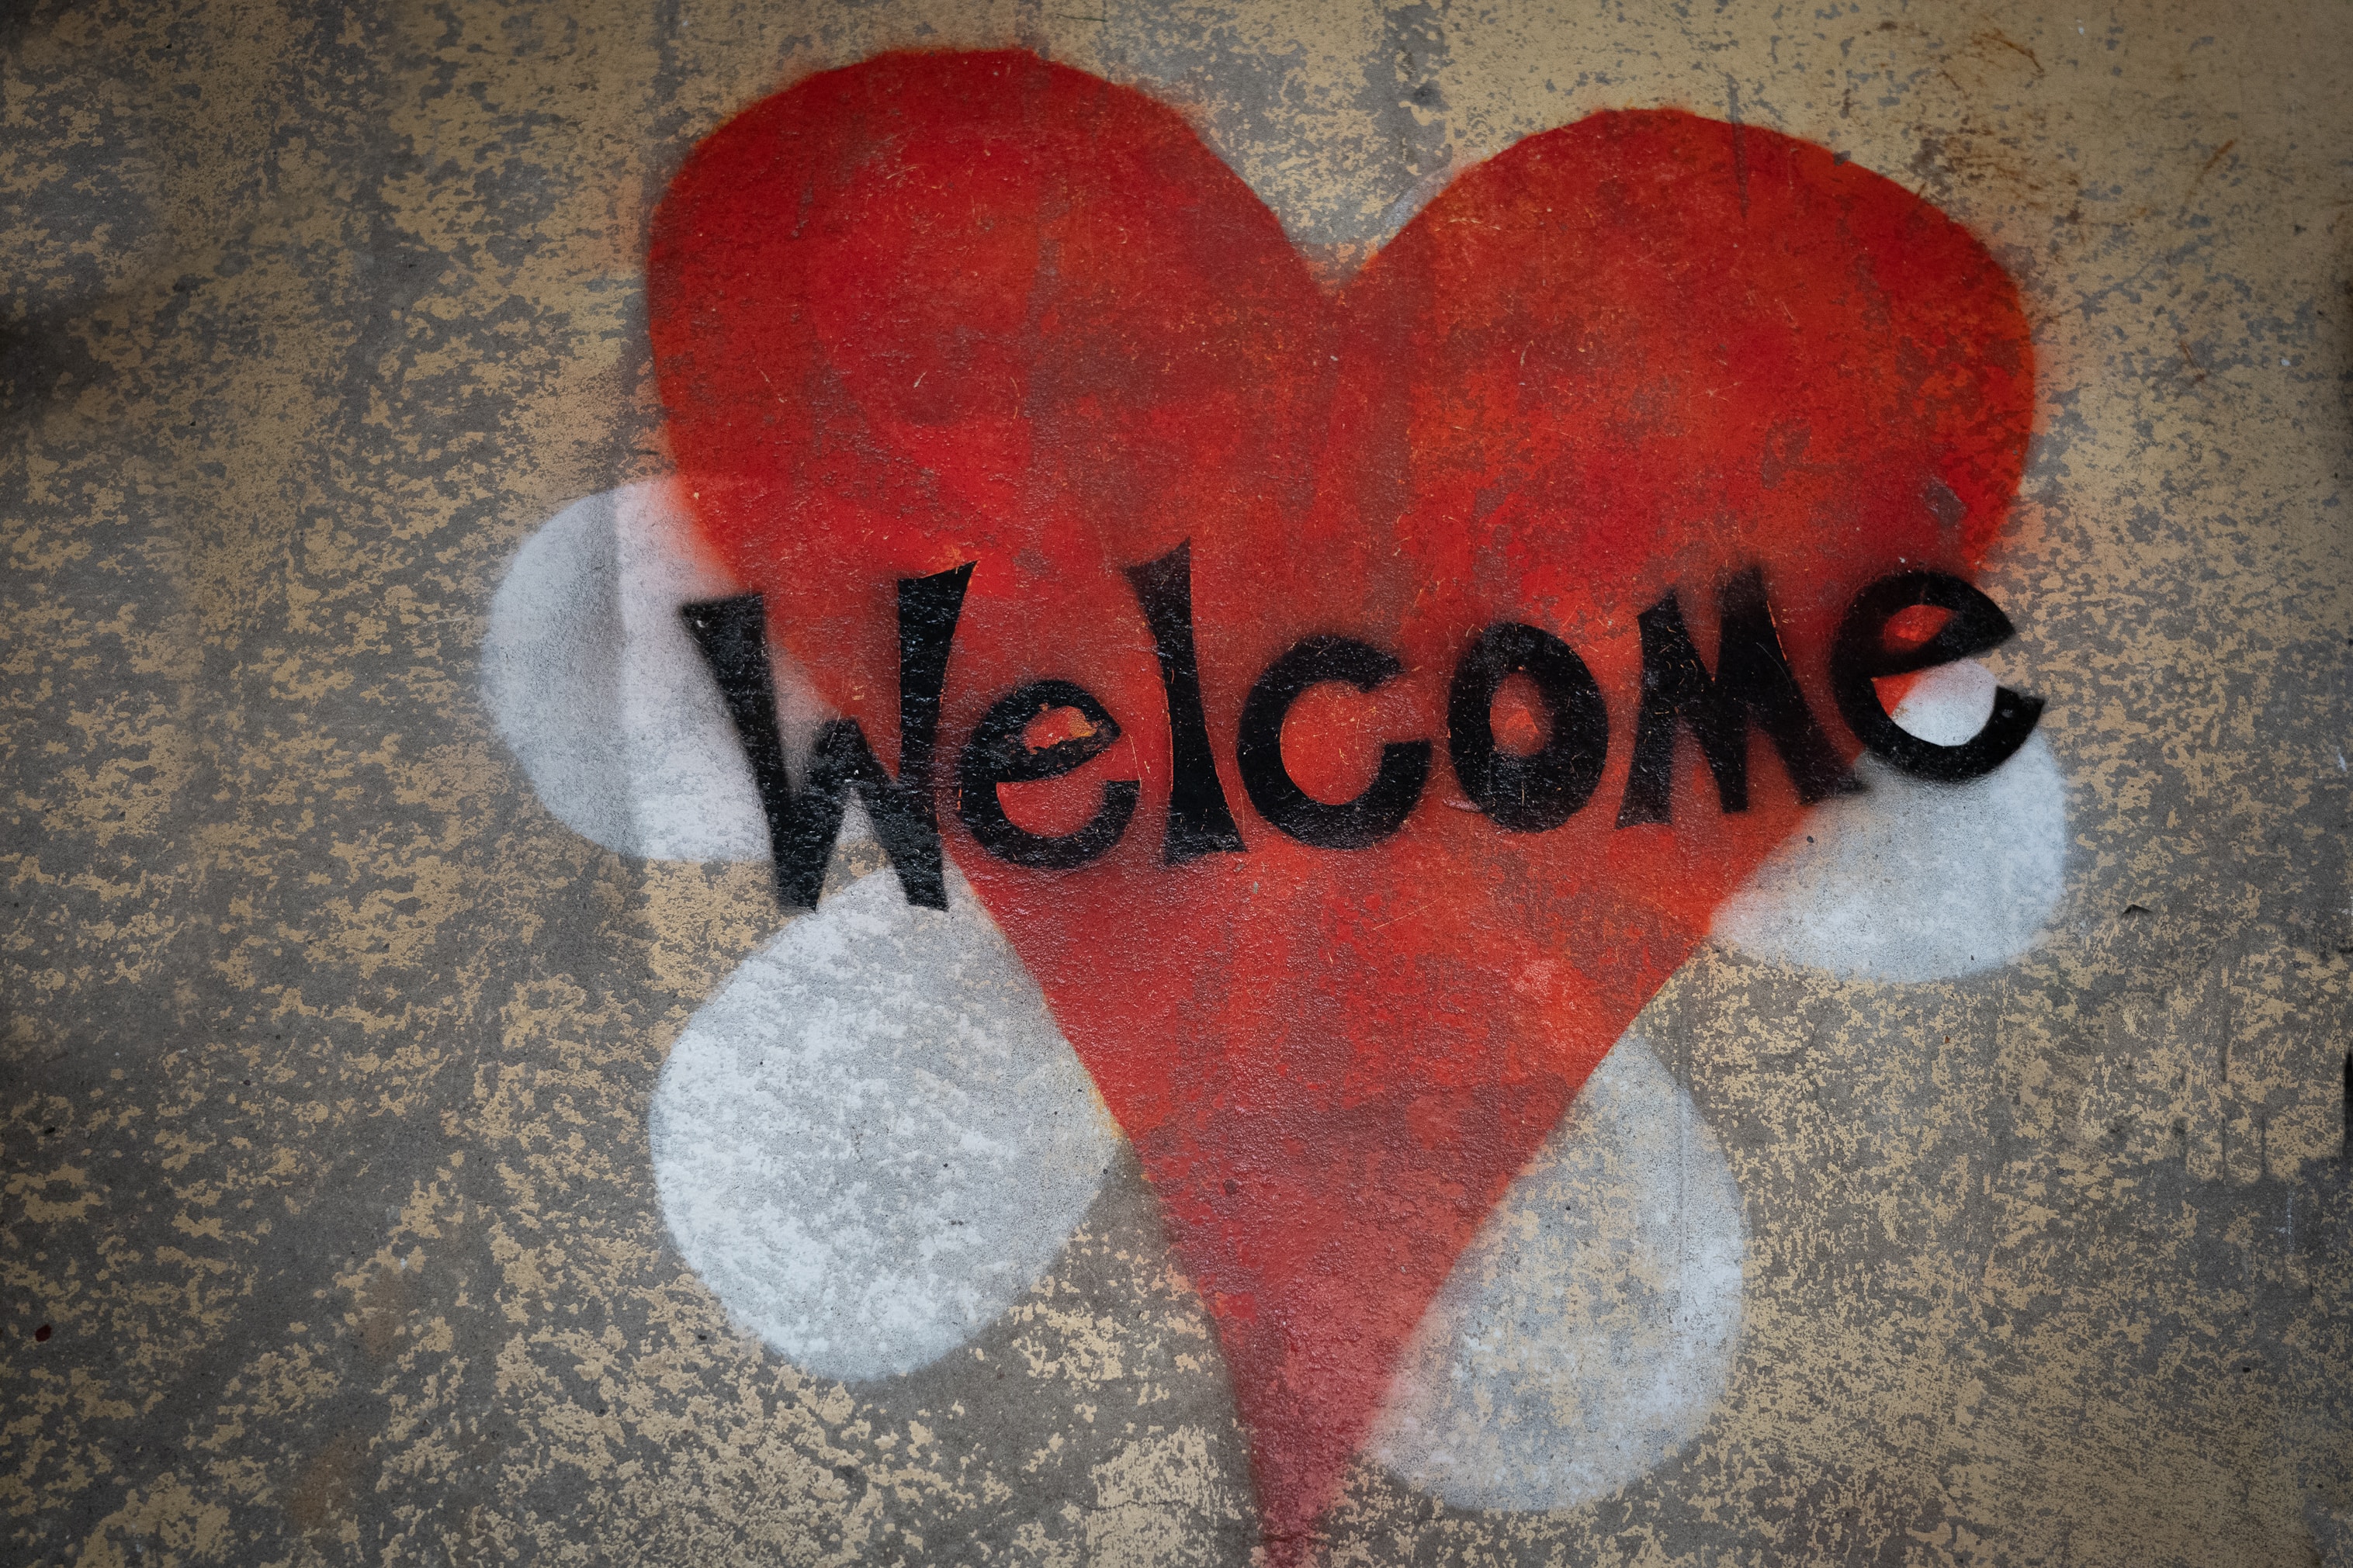 Photograph of a street art. The word welcome is written in black across a red heart.